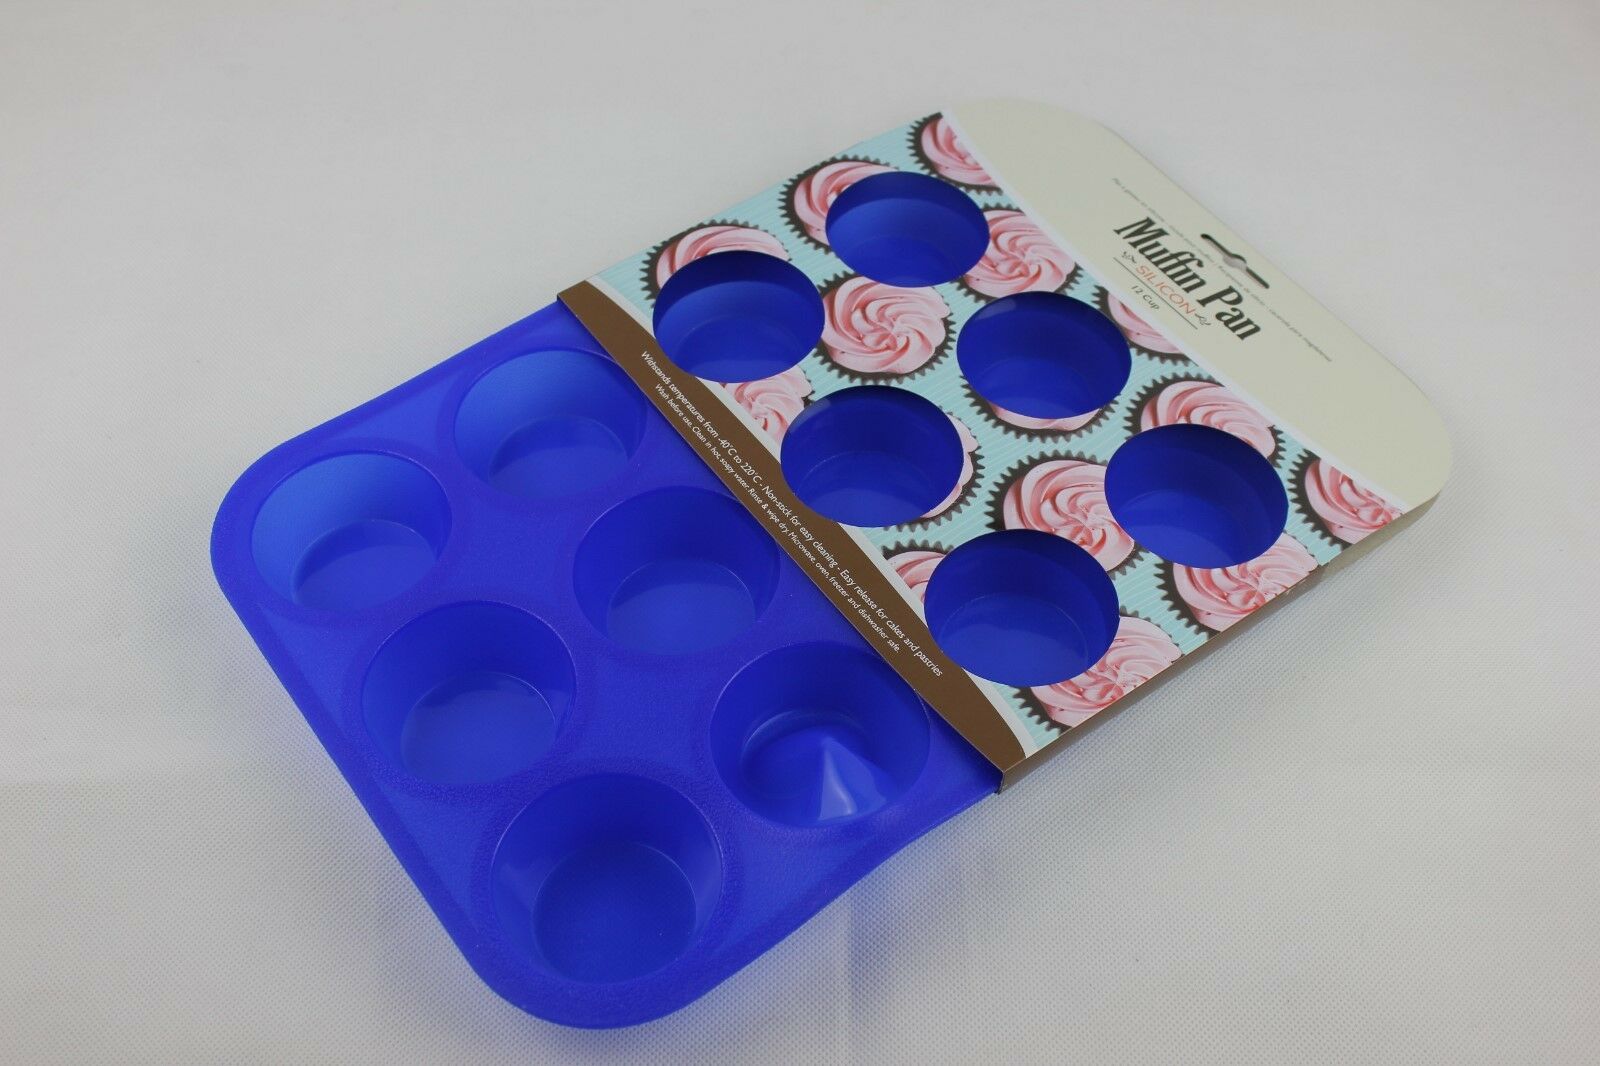 attachment-https://www.cupcakeaddicts.co.uk/wp-content/uploads/imported/0/Silicone-12-Deep-cup-Quality-Muffin-Yorkshire-Pudding-Cupcake-Baking-Tray-Mould-323597448650-2.jpg